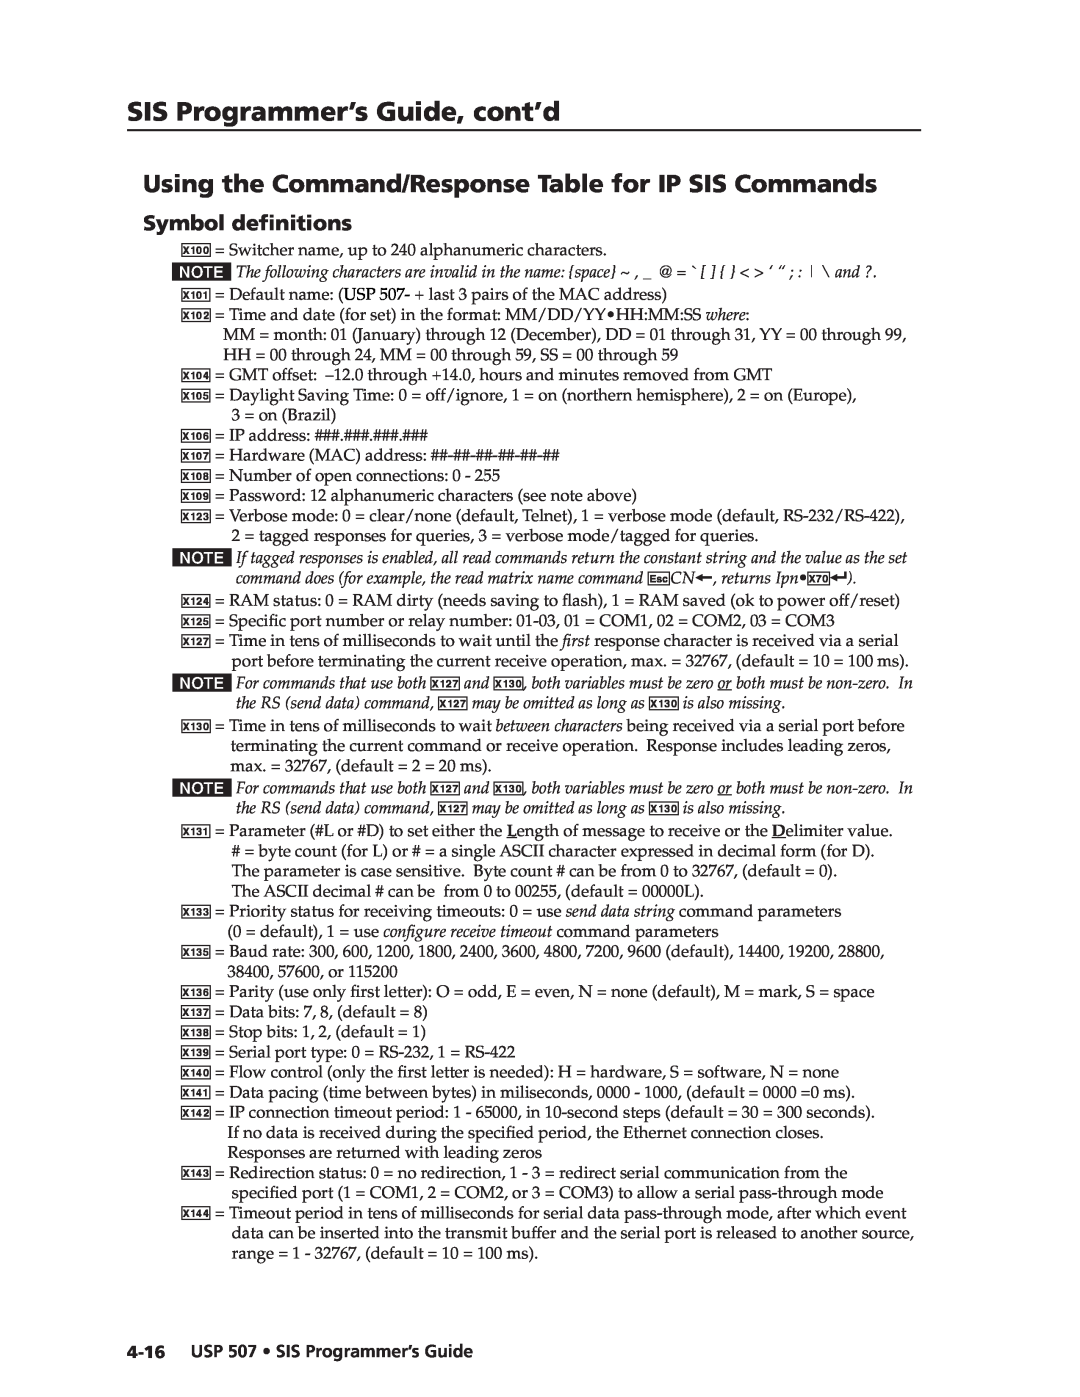 Extron electronic manual SIS Programmer’s Guide, cont’d, Symbol definitions, 4-16USP 507 • SIS Programmer’s Guide 